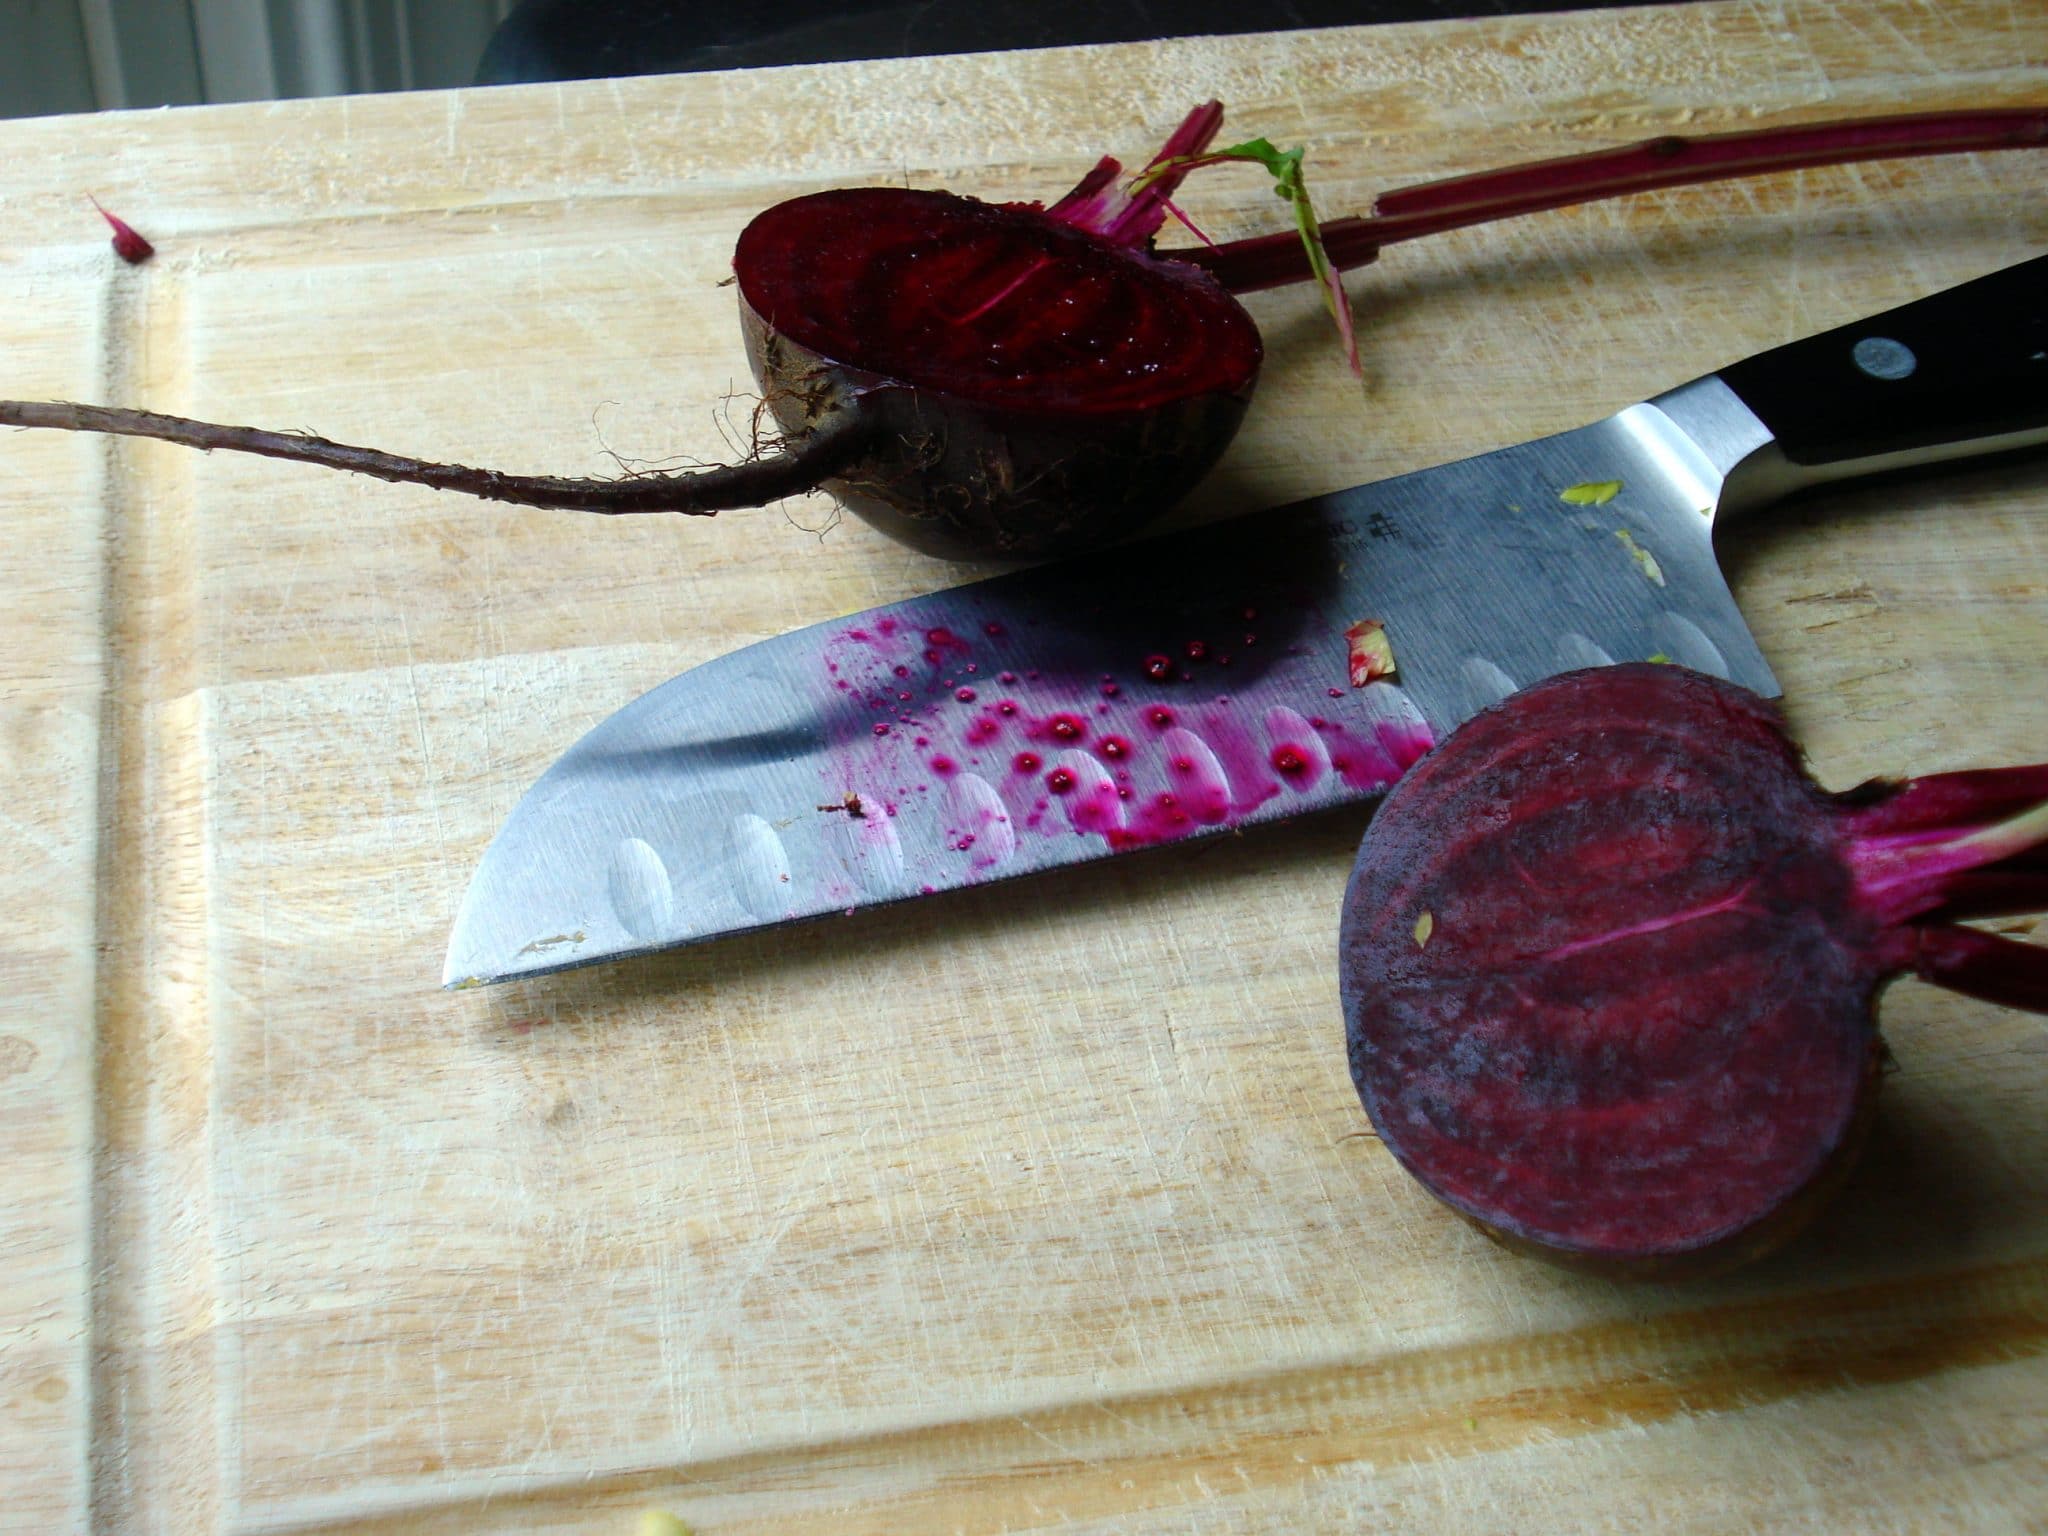 One beet cut in half on cutting board with knife